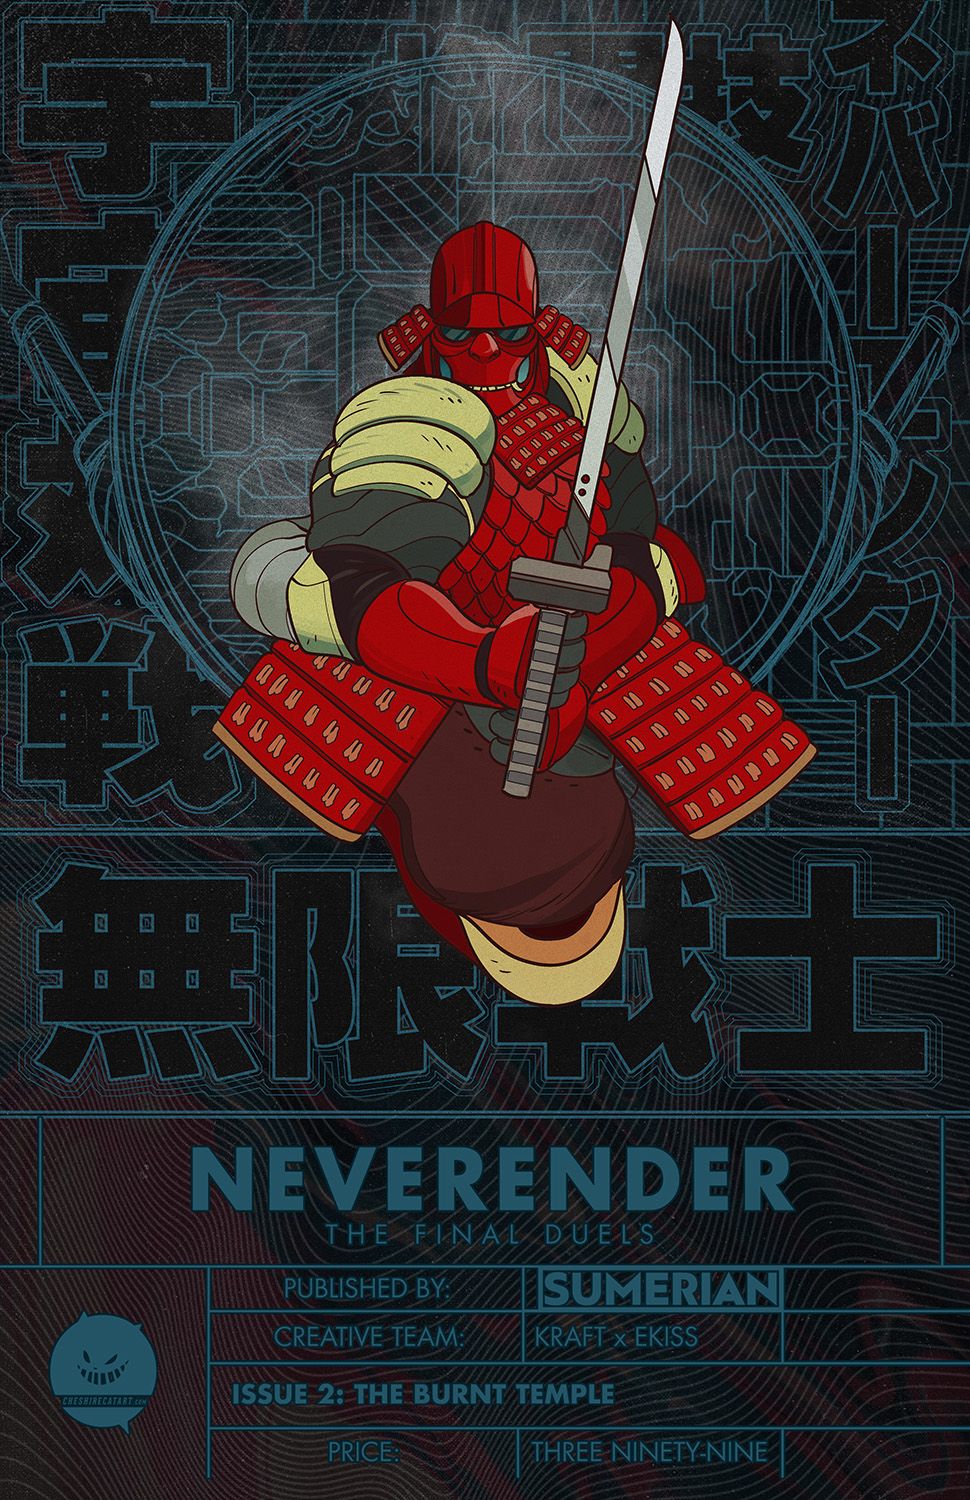 Neverender: The Final Duels #2 Comic